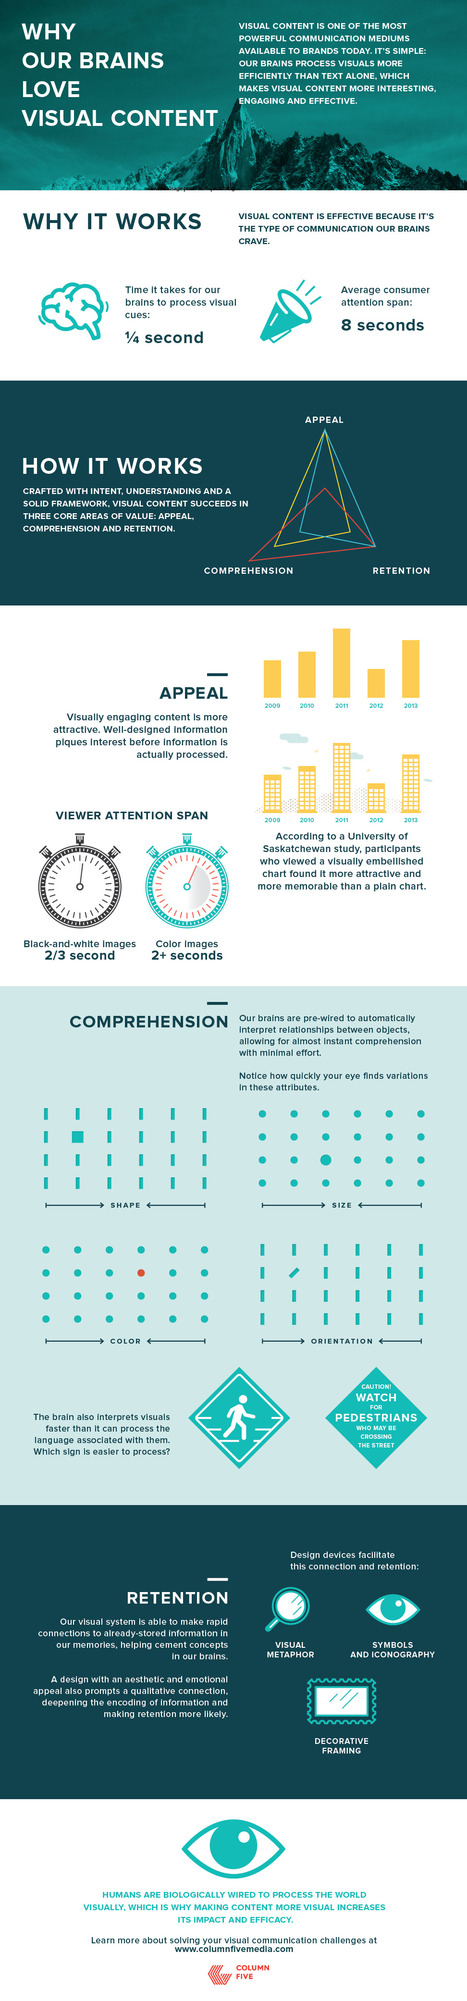 Why Our Brains Love Visual Content [infographic] | digital marketing strategy | Scoop.it